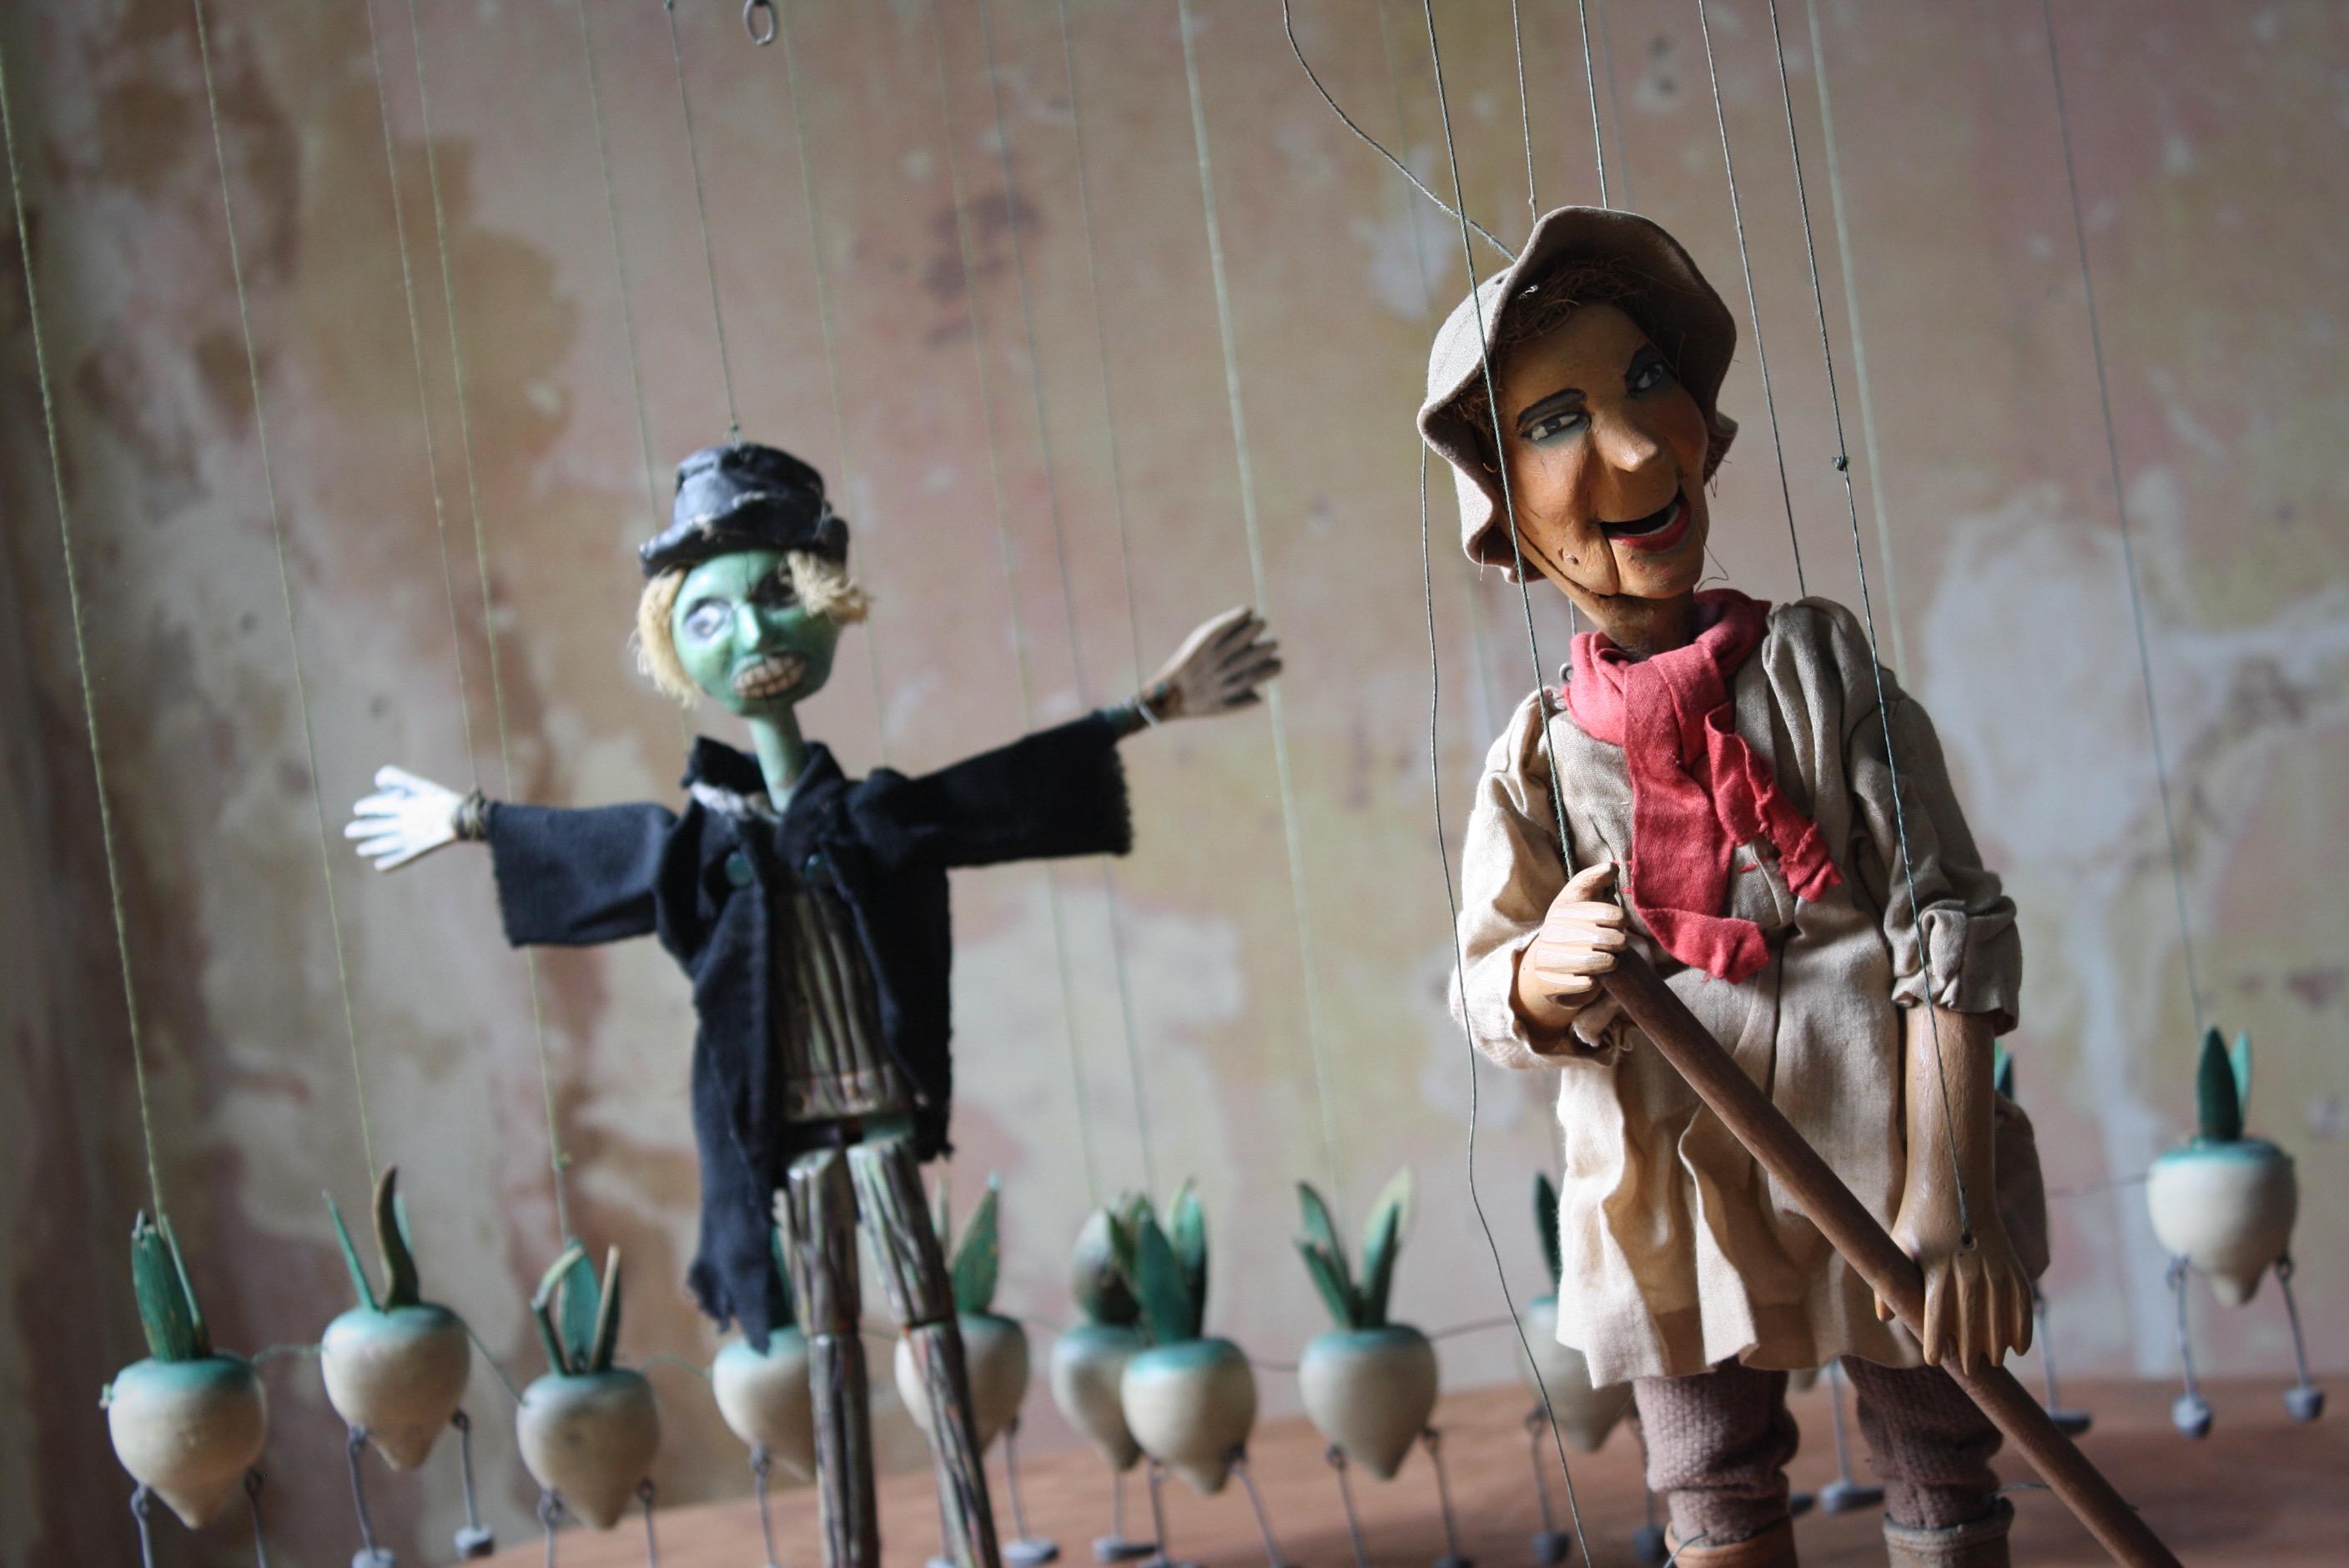 A charming collection of hand crafted puppets by John Carr, (William & His Turnips) depicting a scare crow, a gardener with a hoe and 12 turnips.

Developed in the early part of the 40s A countryman character, singing comic songs in dialect, was